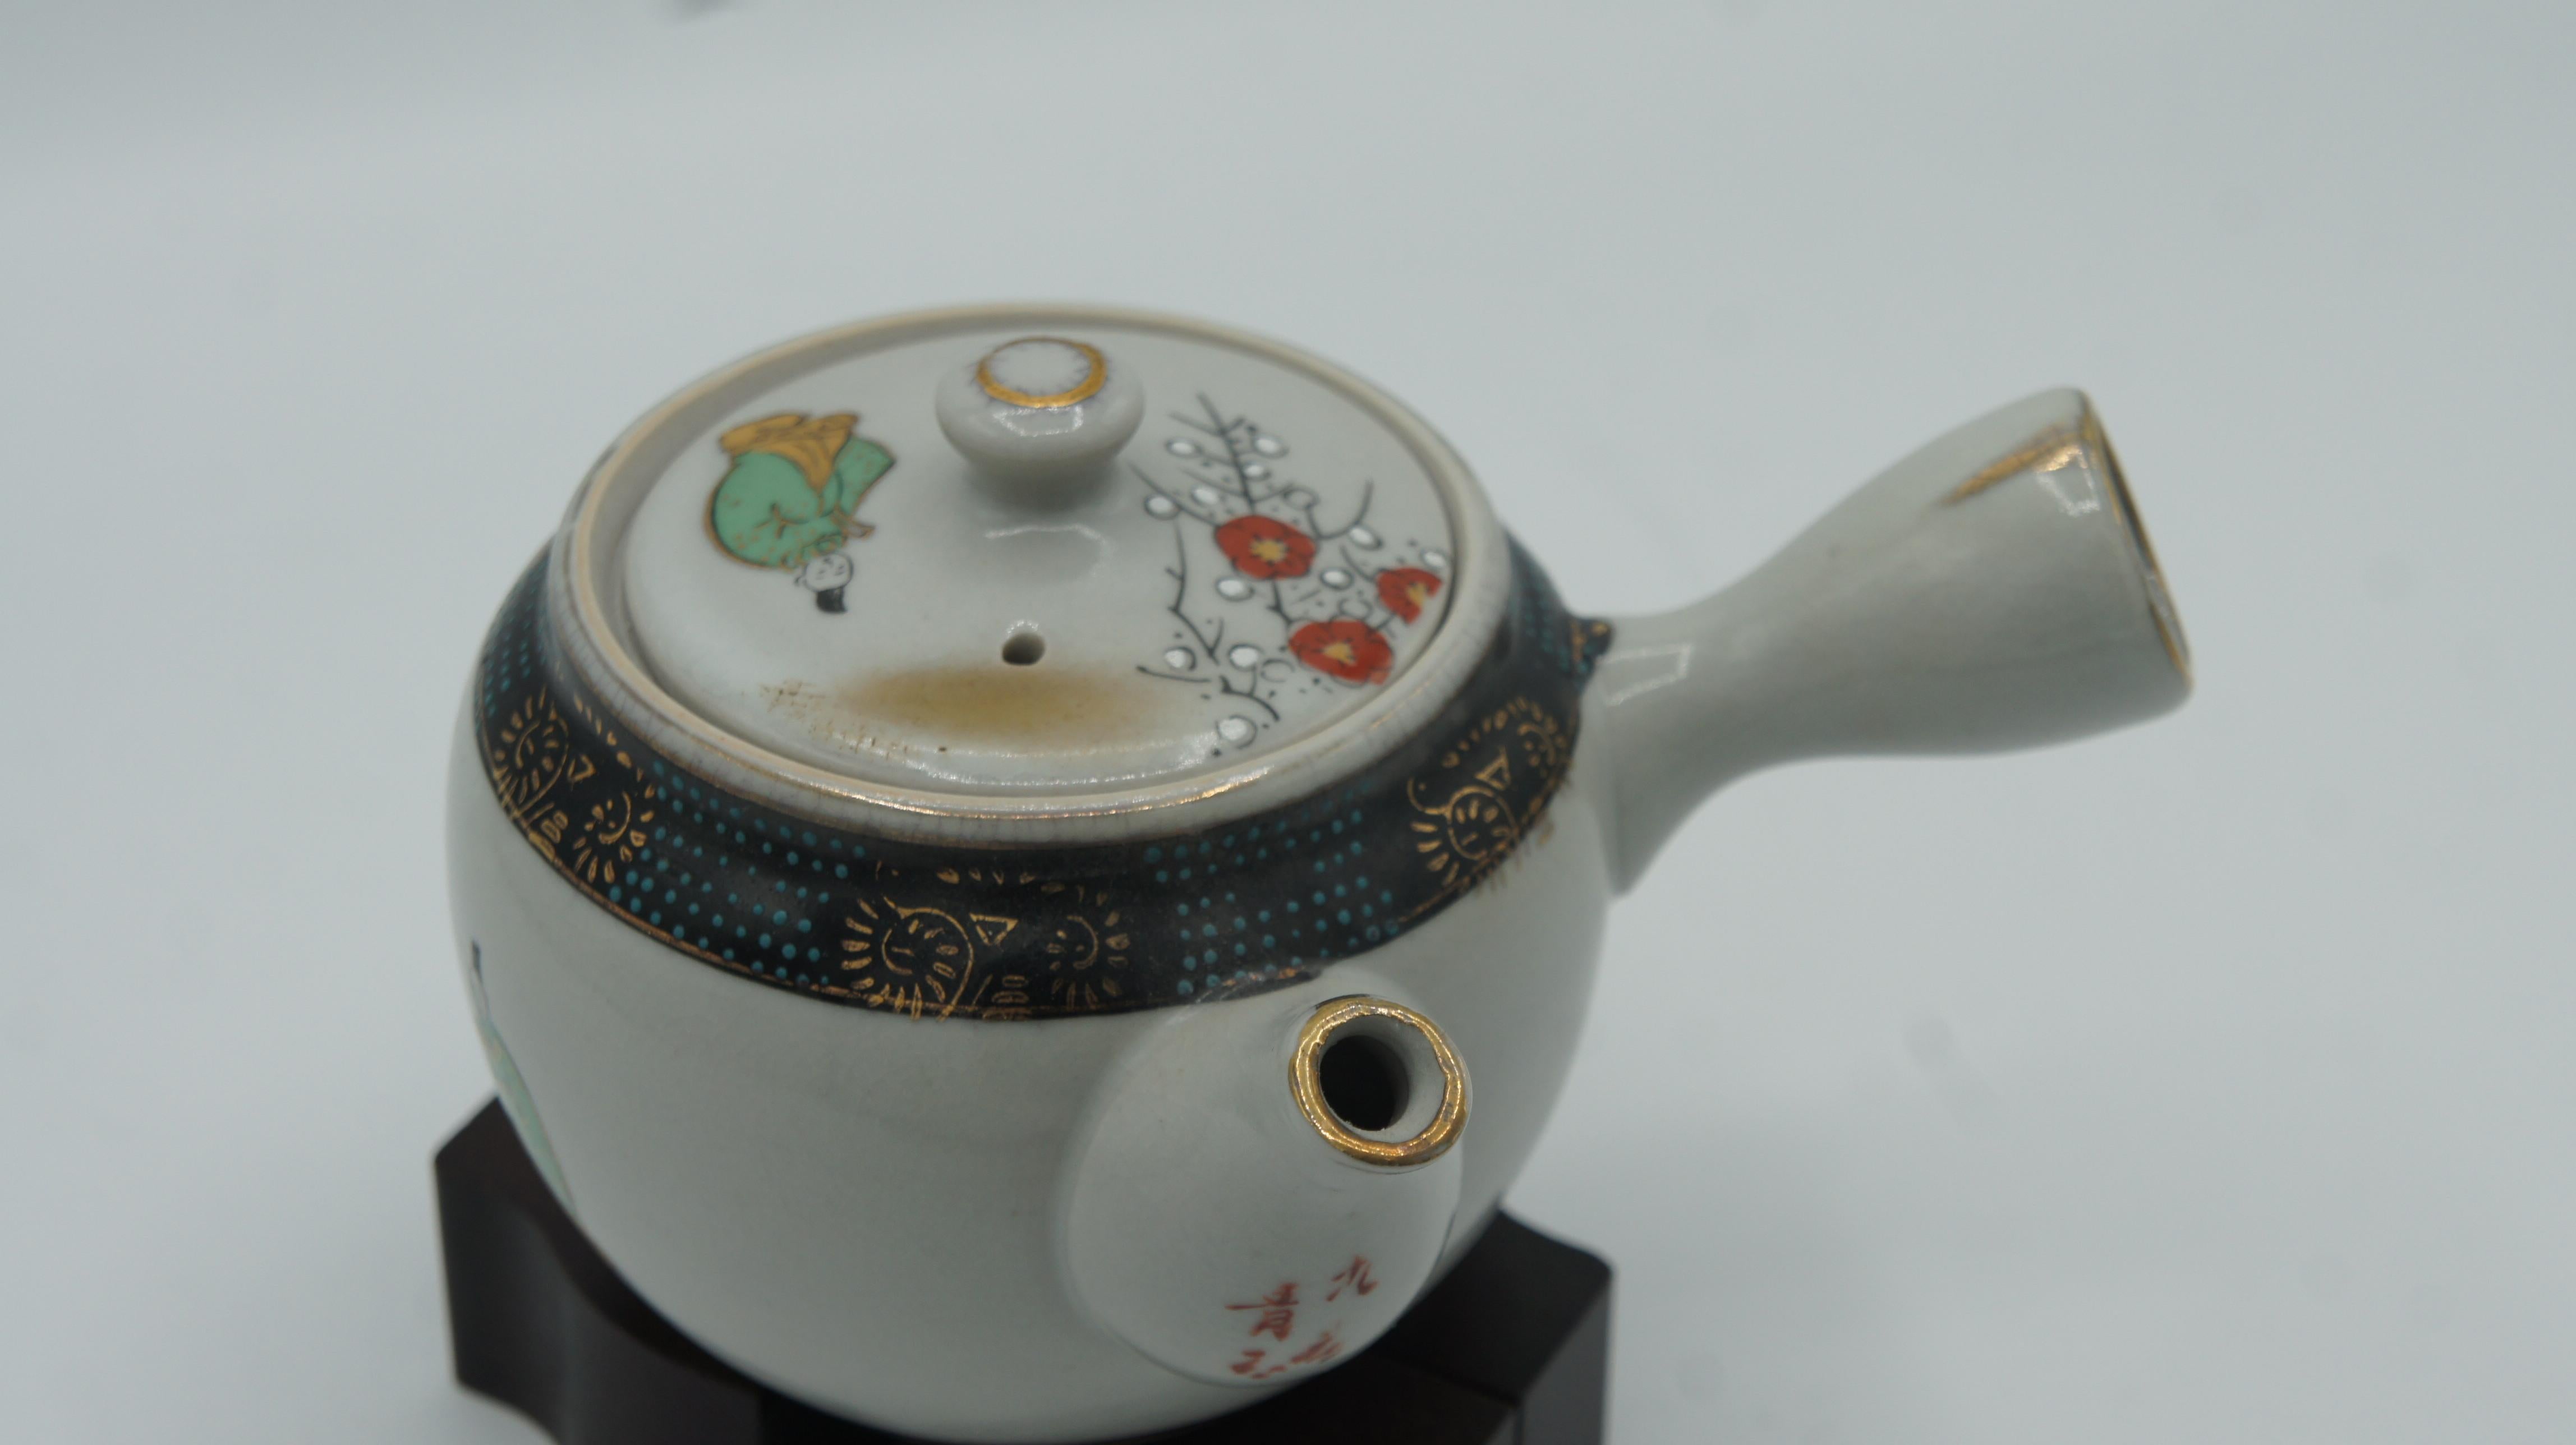 Details-
Era: Showa (around 1960)
Made: in Japan
Materials: Ceramic
*This tea pot is an antique piece made in Japan. It is not a new item and may have small defects. 
If this is the case, we will try to take photos and describe them, but they